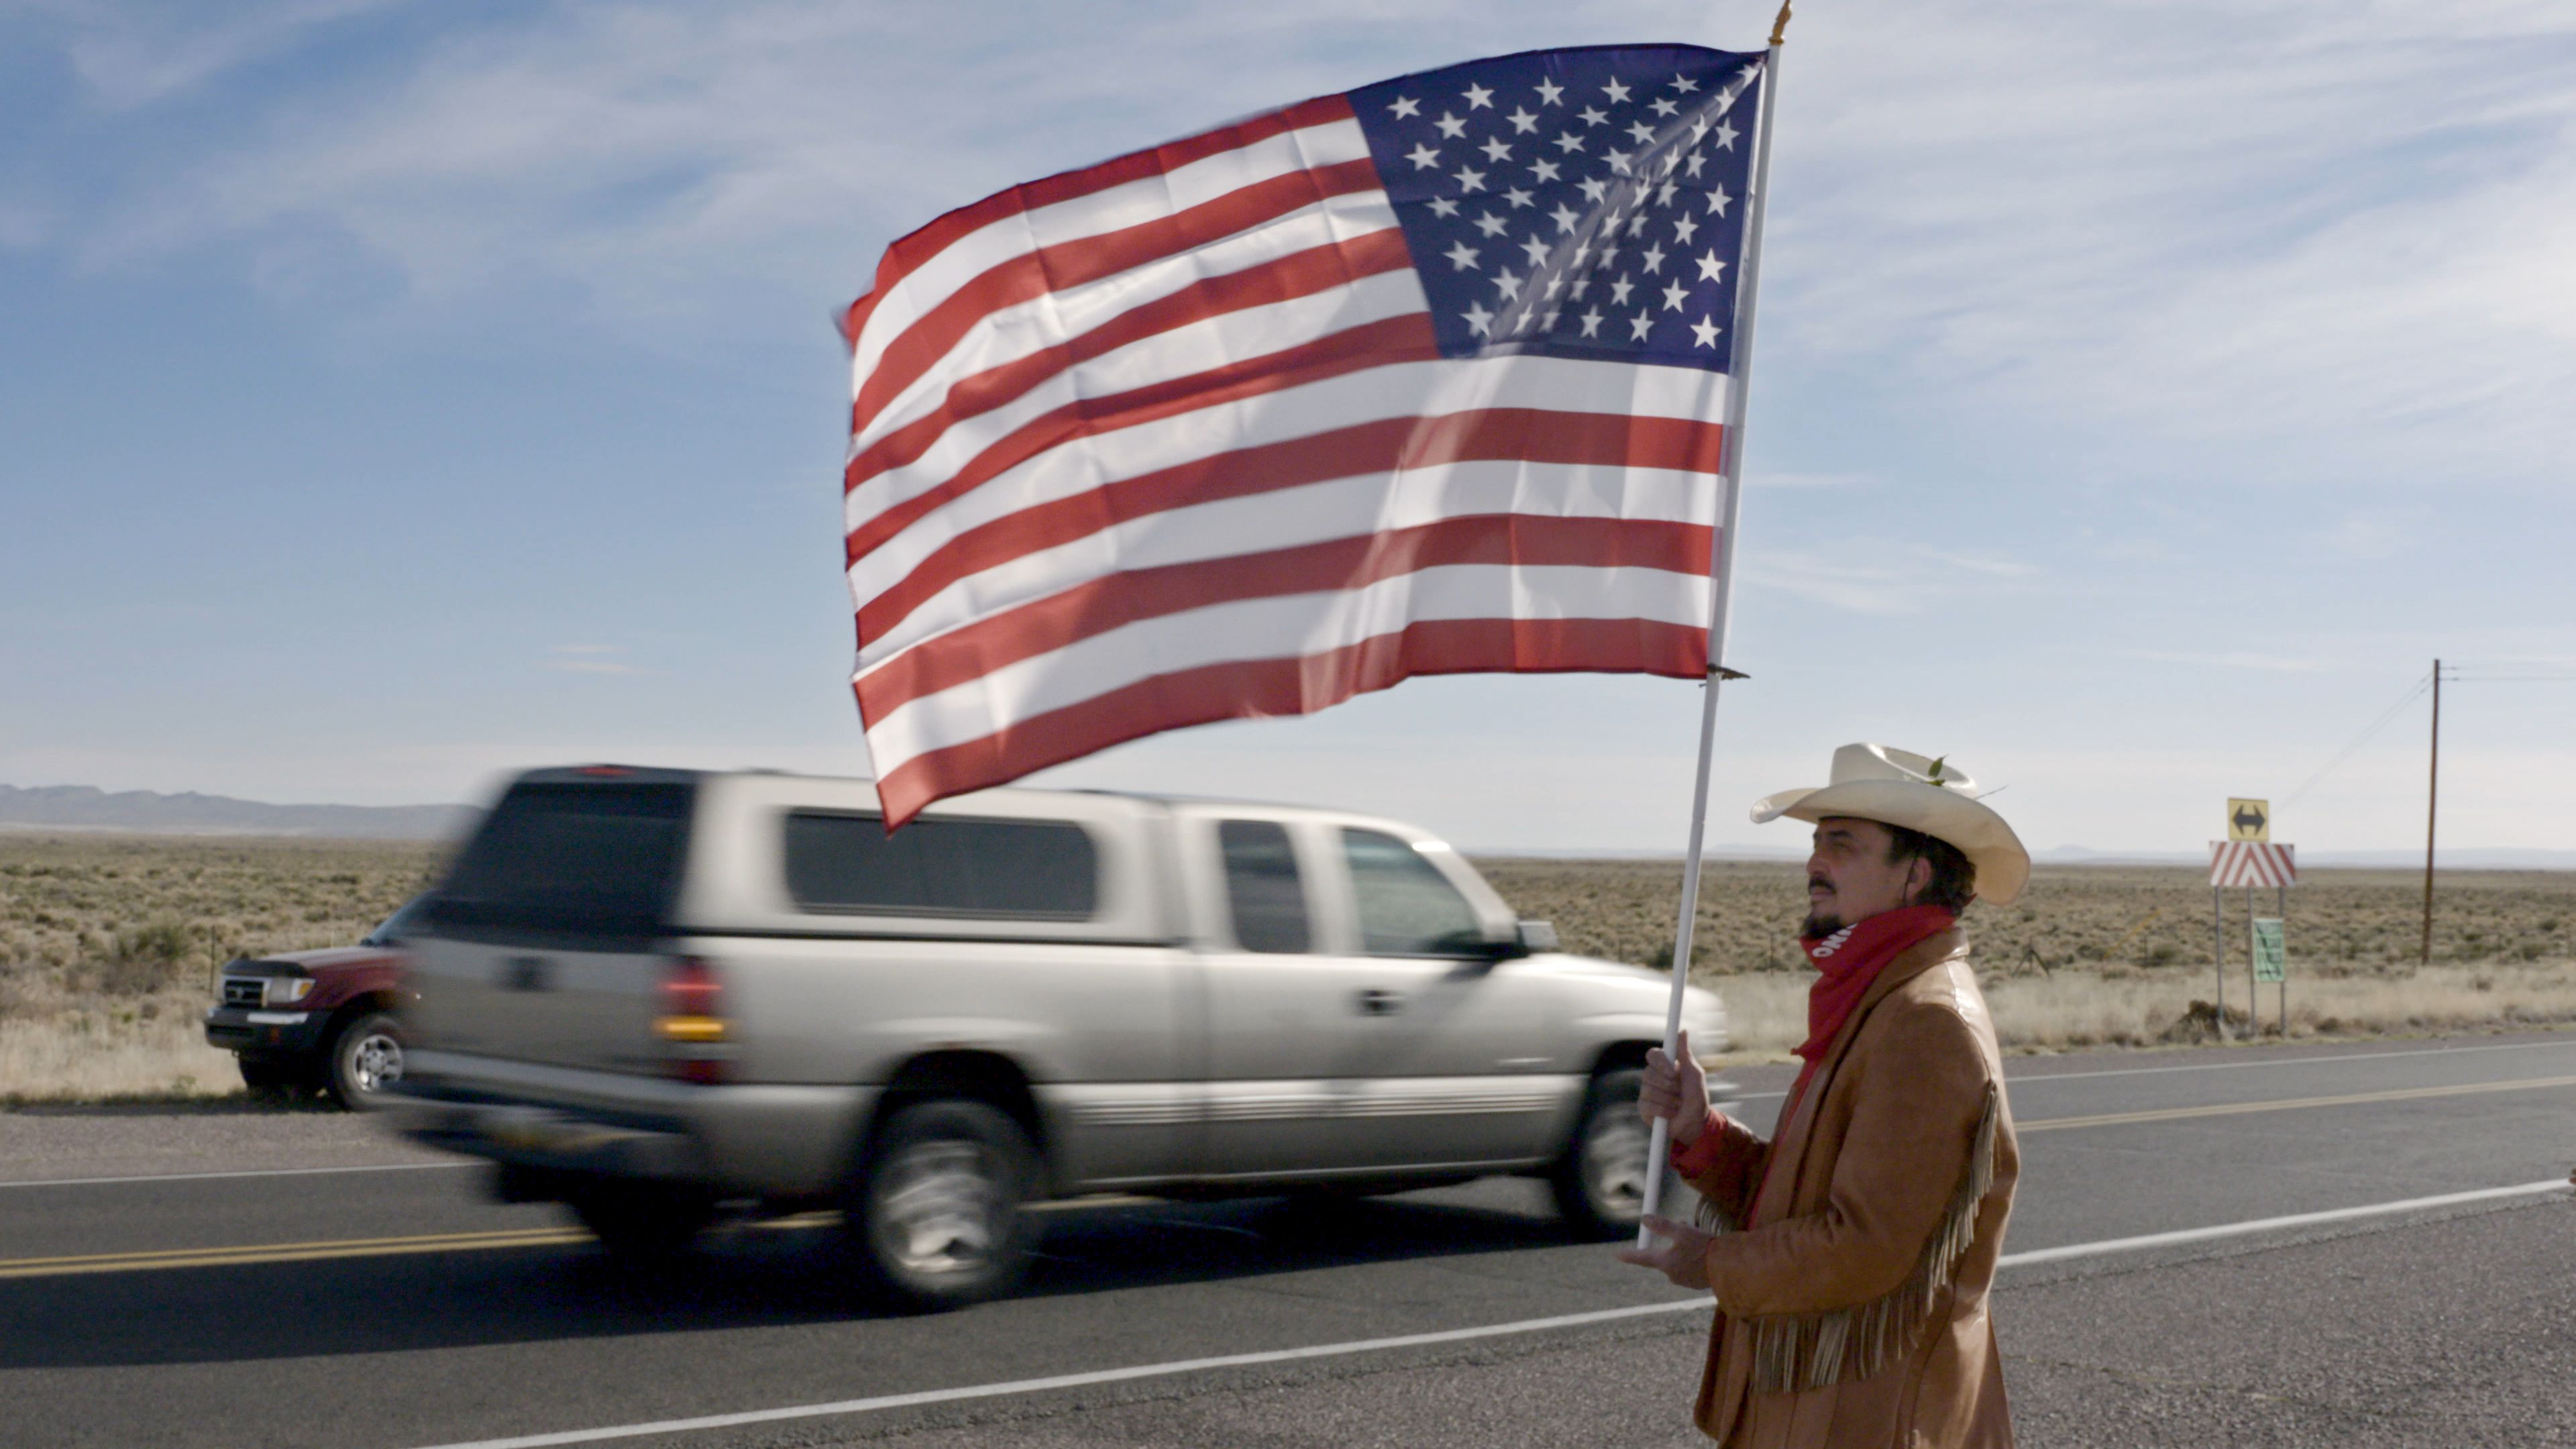 Paul Pino, a downwider from Carrizozo, N.M., protests outside the Trinty Test site.